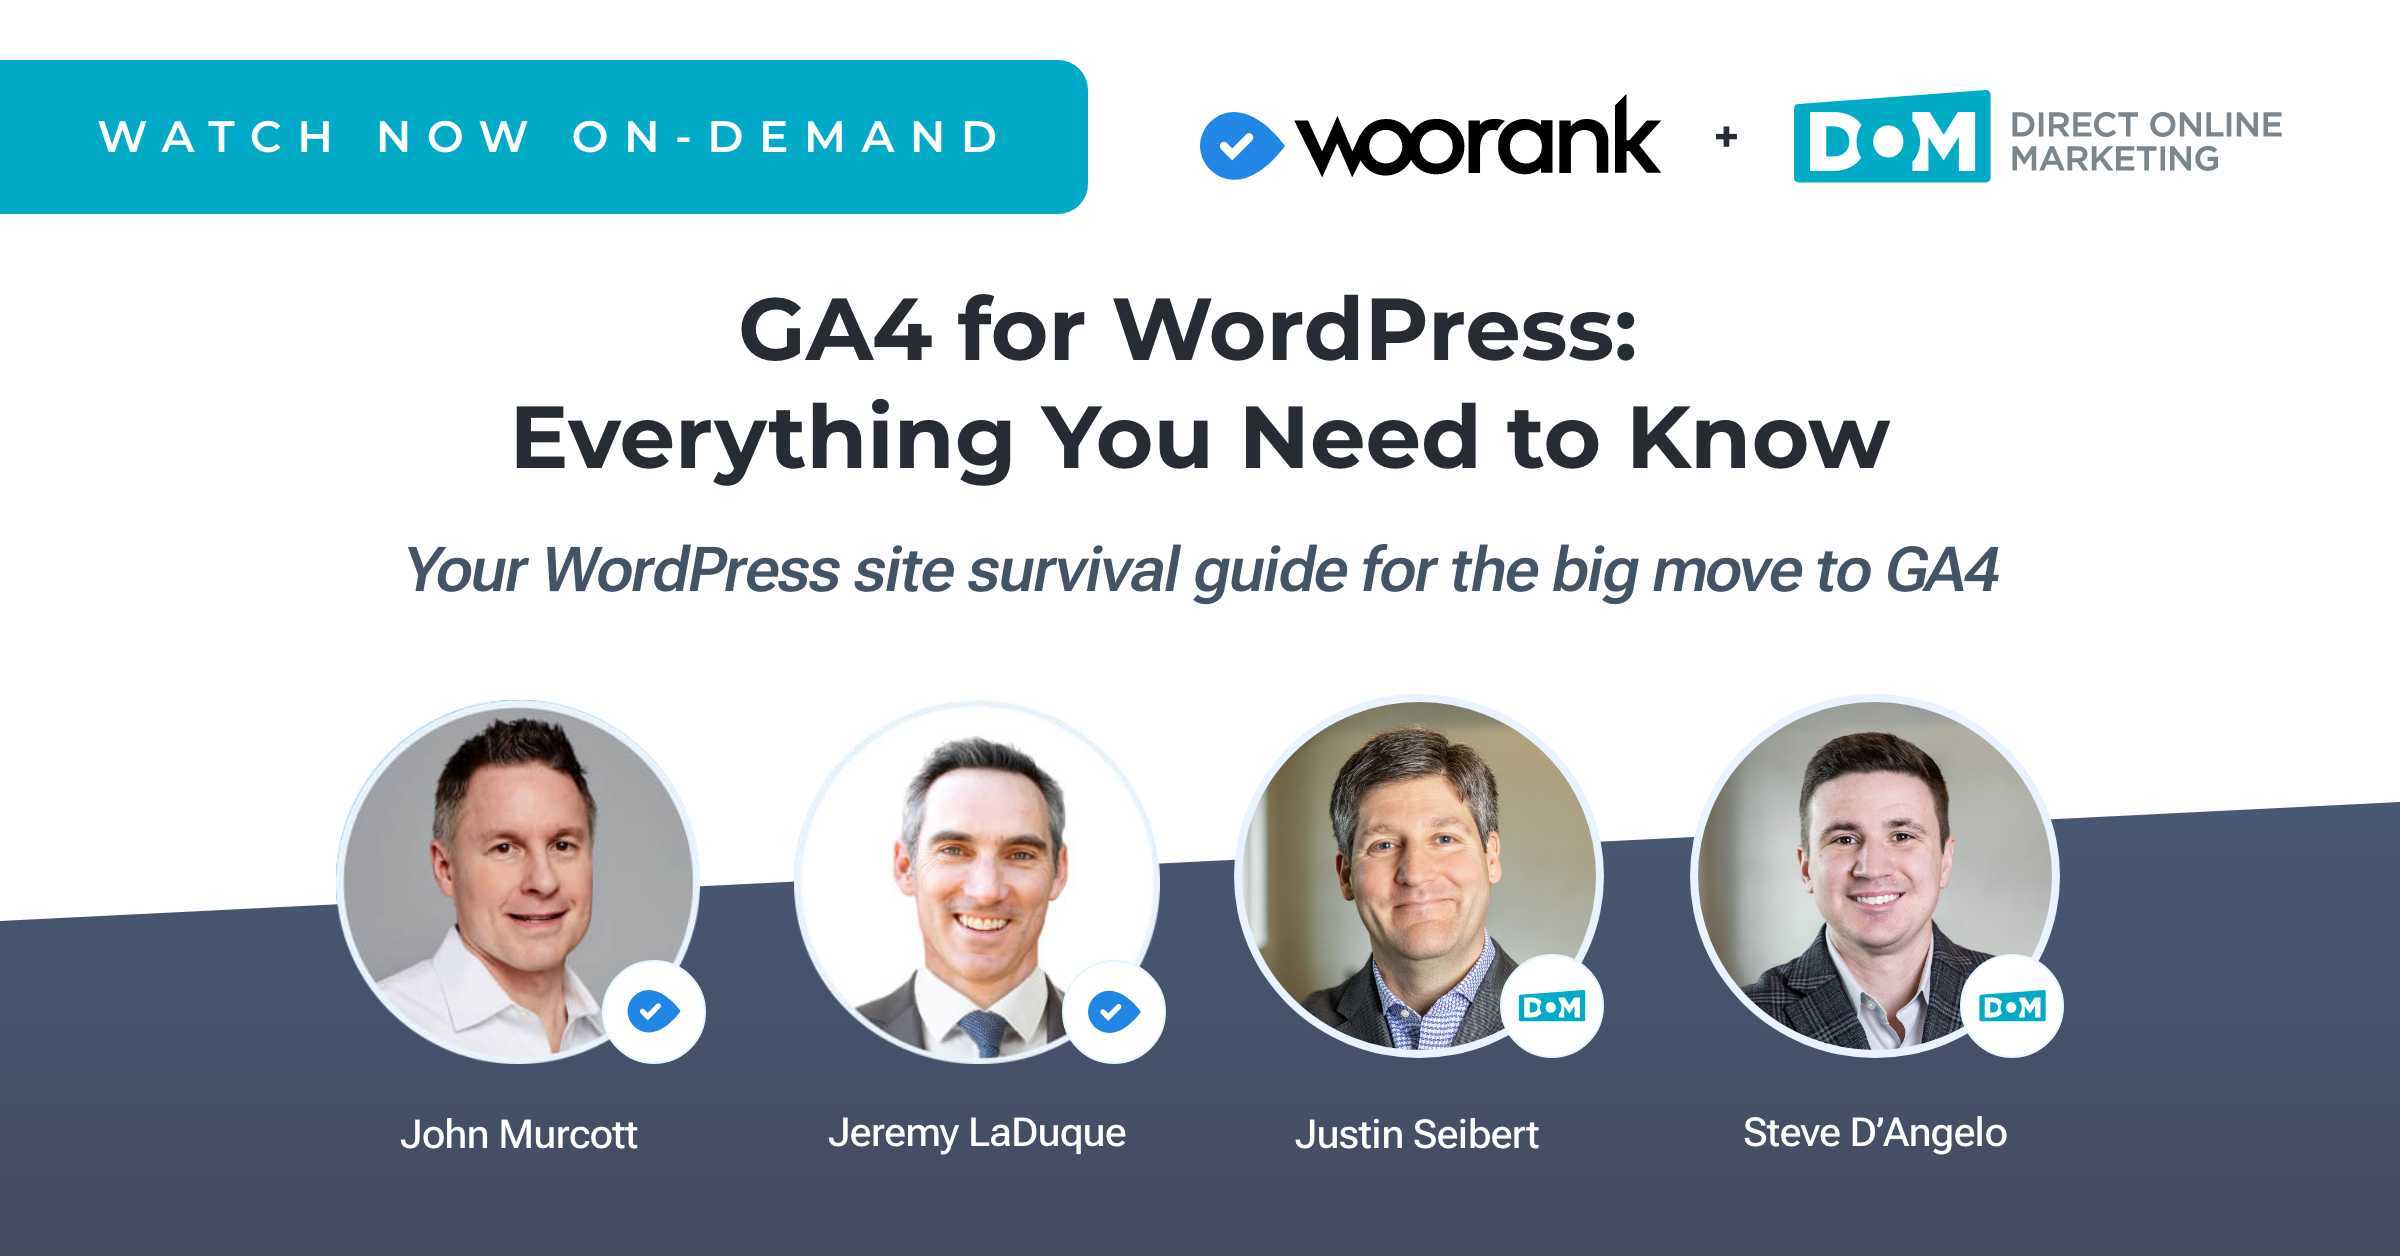 ga4 for wordpress-everything you need to know dom blog